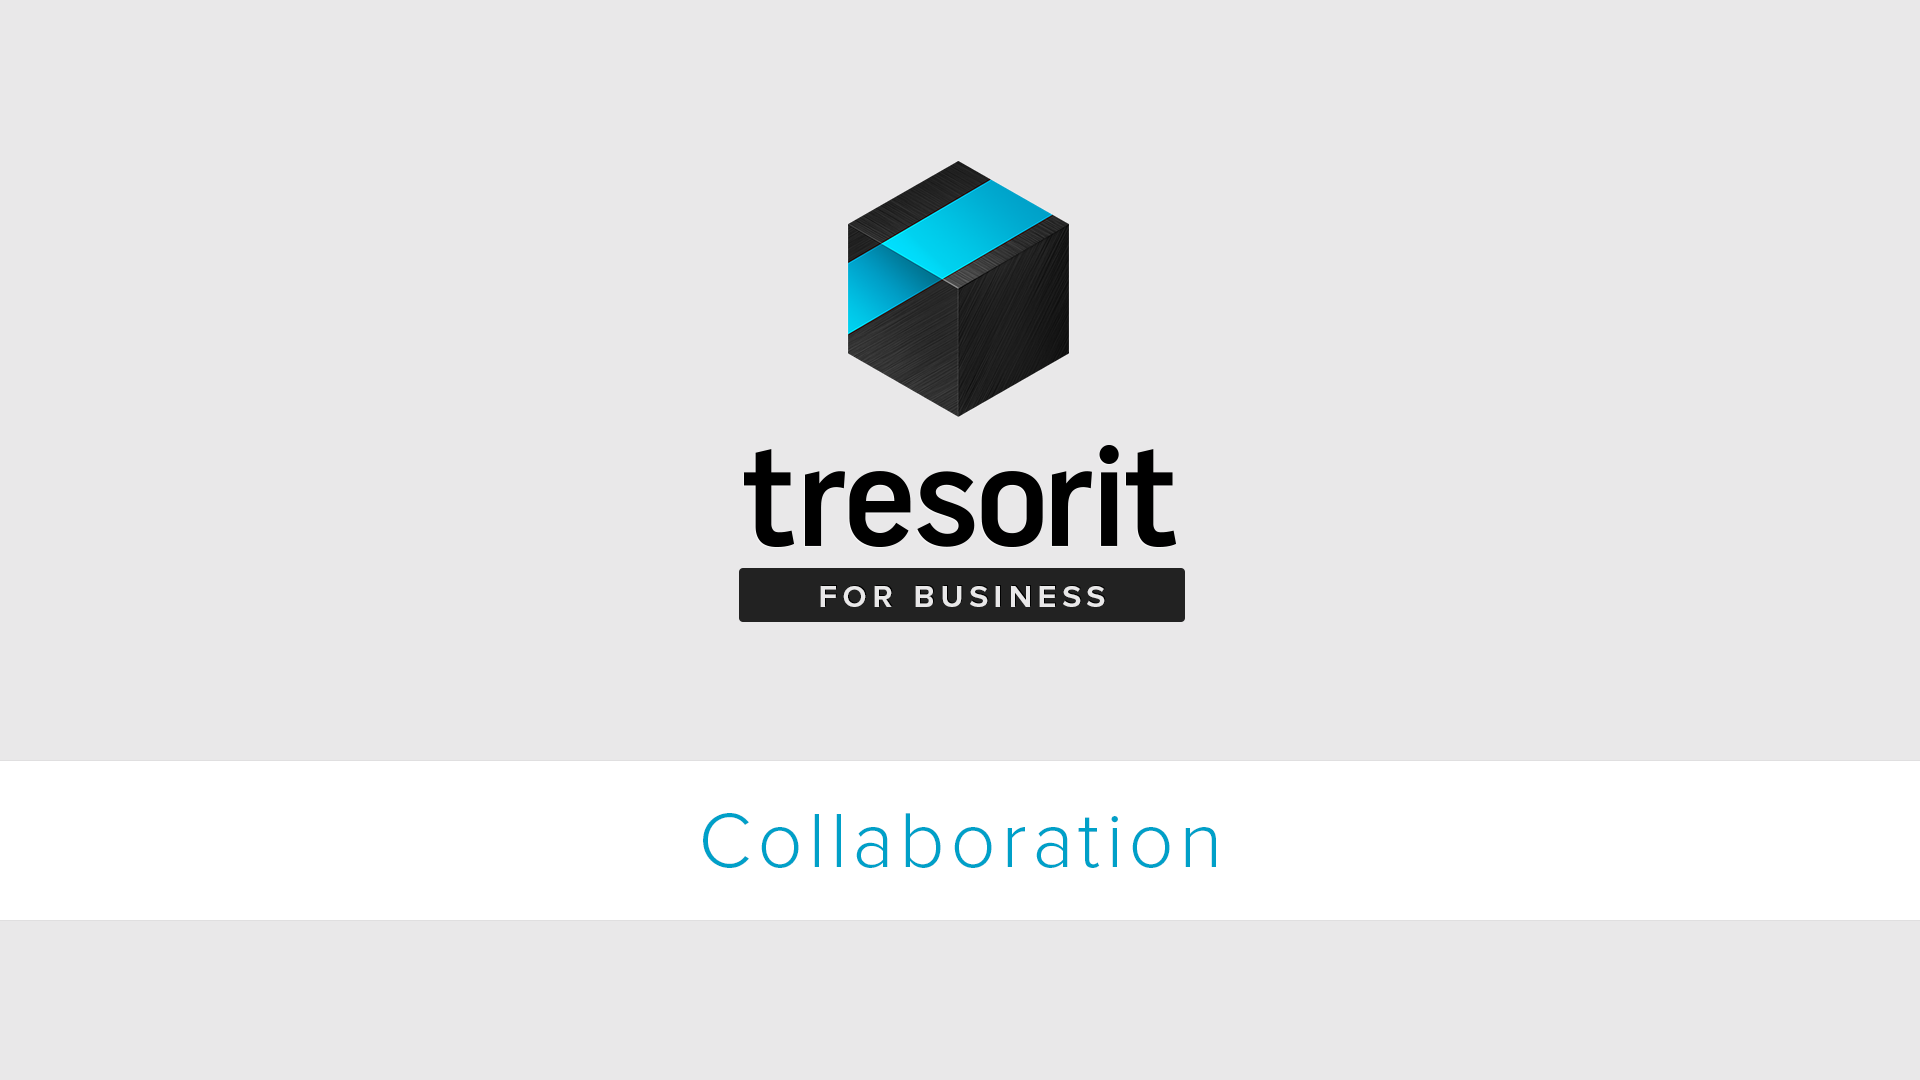 How to use shared tresors (a video tutorial)